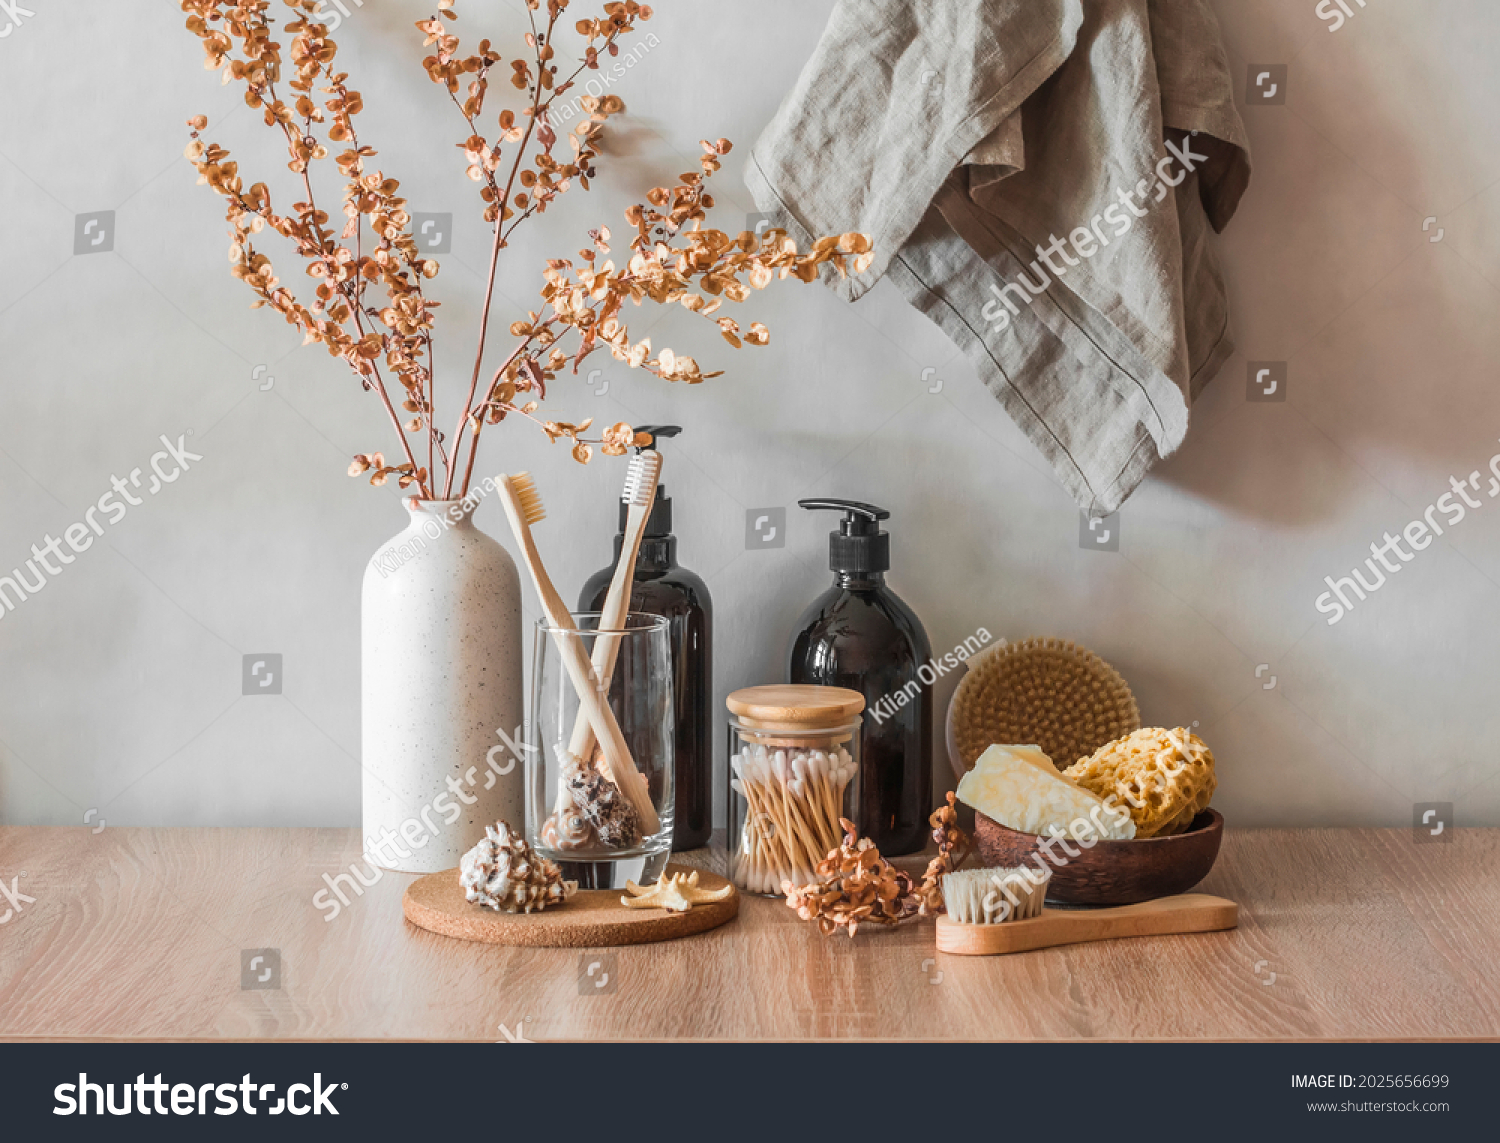 Bathroom interior still life. Decorative flowers, shampoo bottles, cotton buds, brushes, soap, towels on a wooden background. Minimalism interior       #2025656699